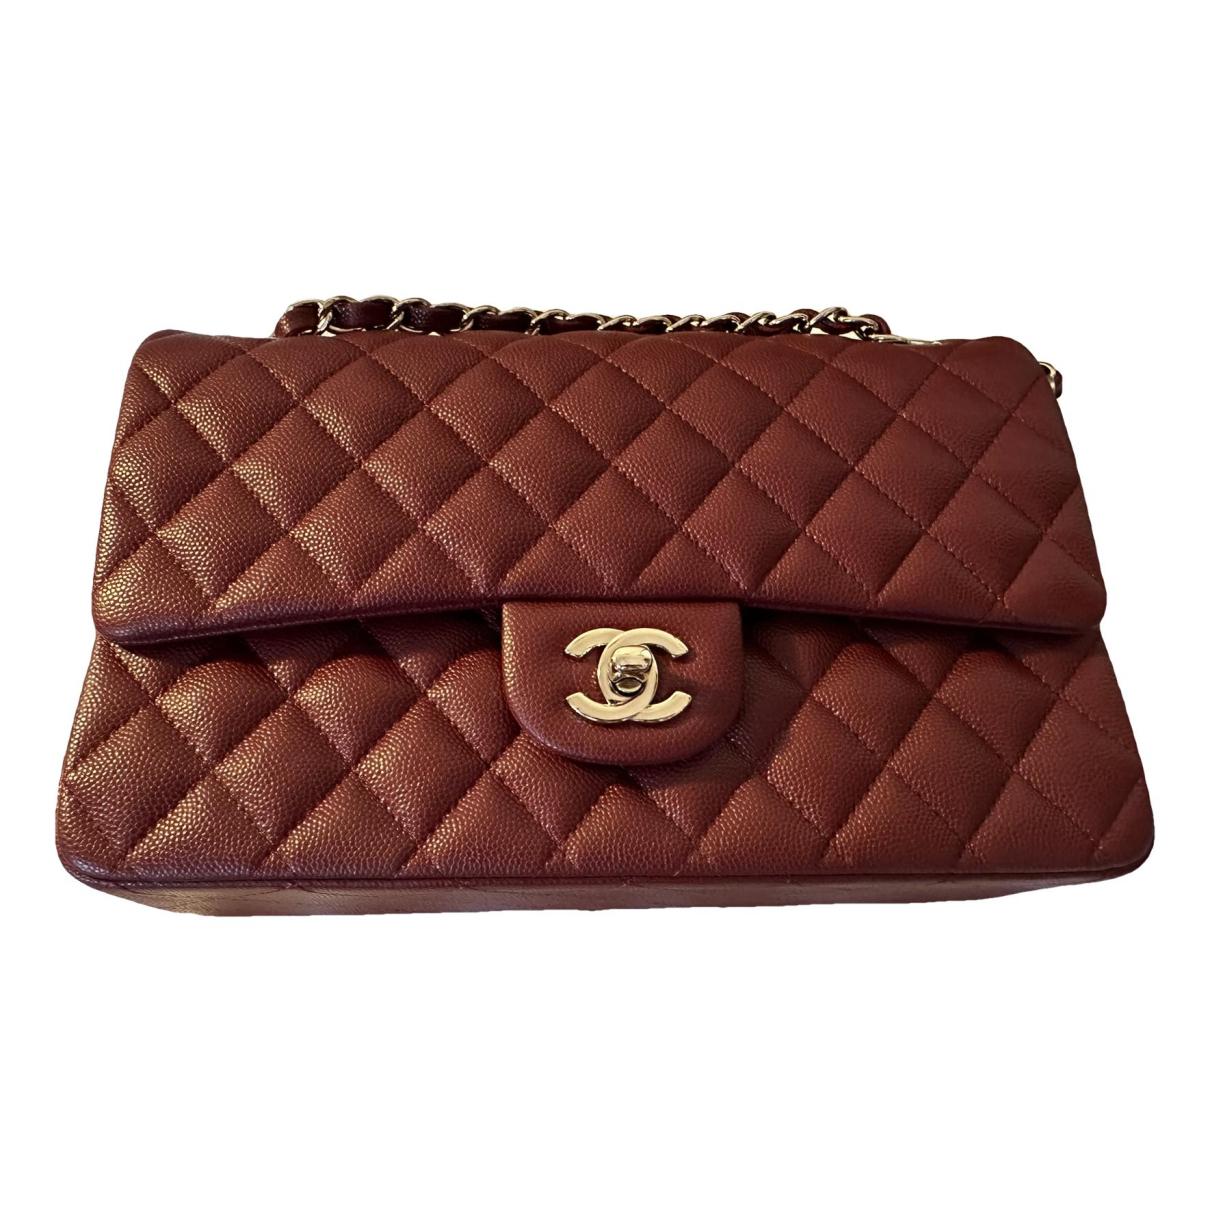 Timeless/classique leather crossbody bag Chanel Burgundy in